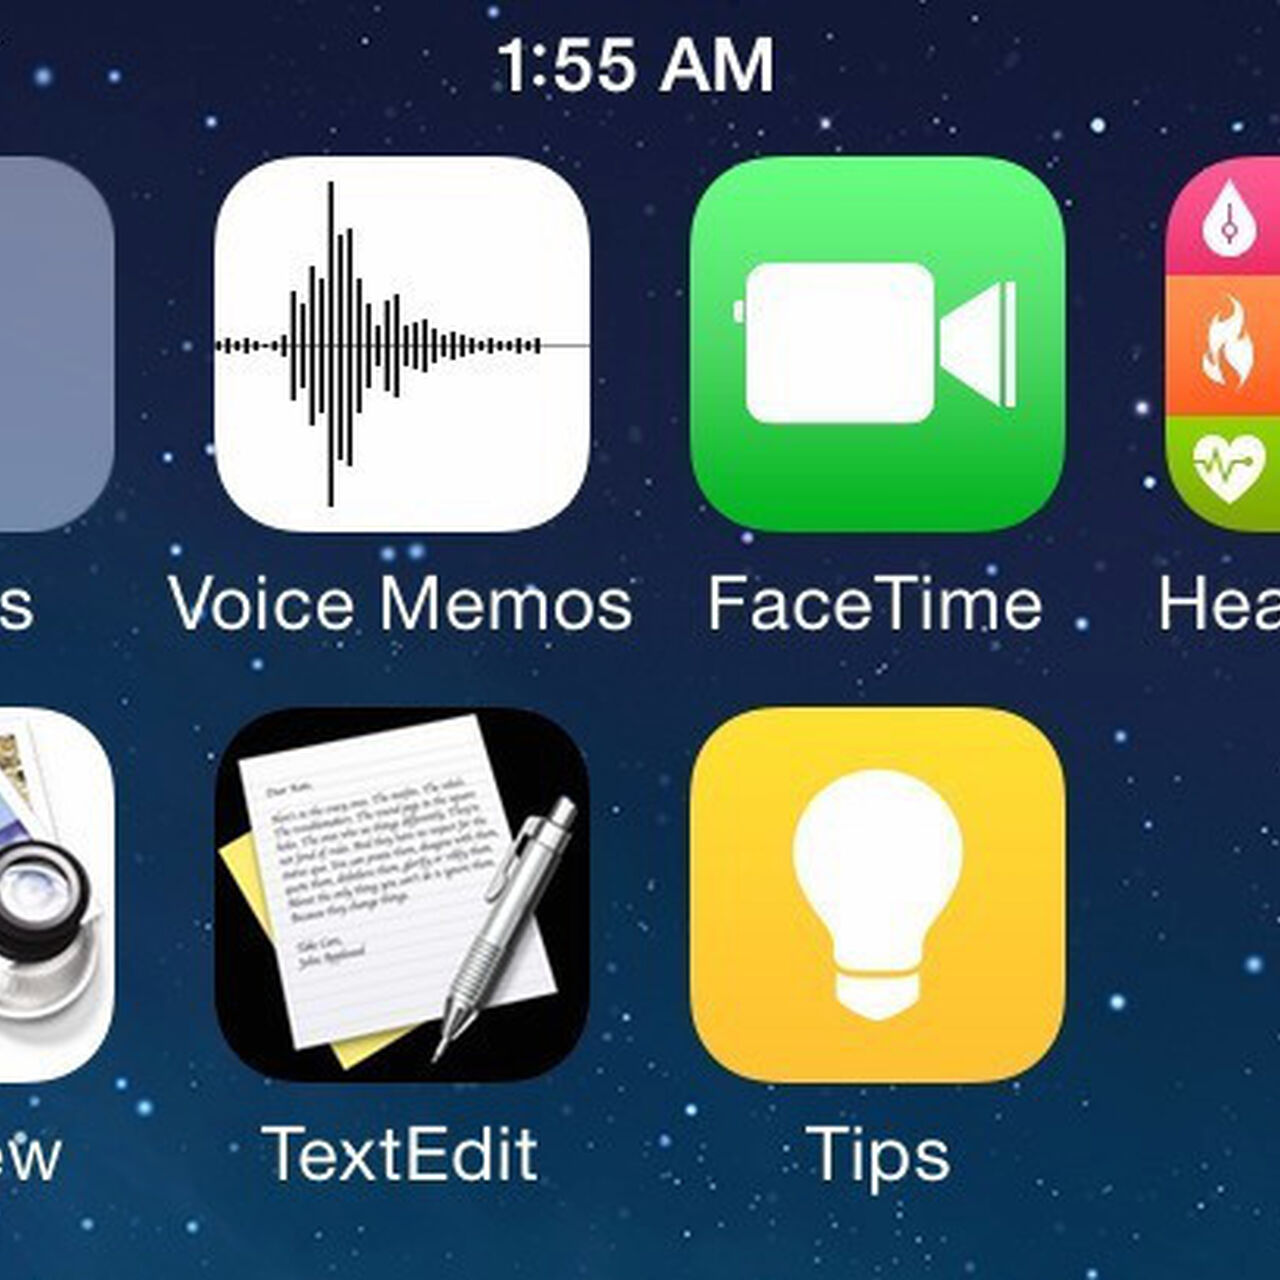 iOS 8 is shown in leaked images